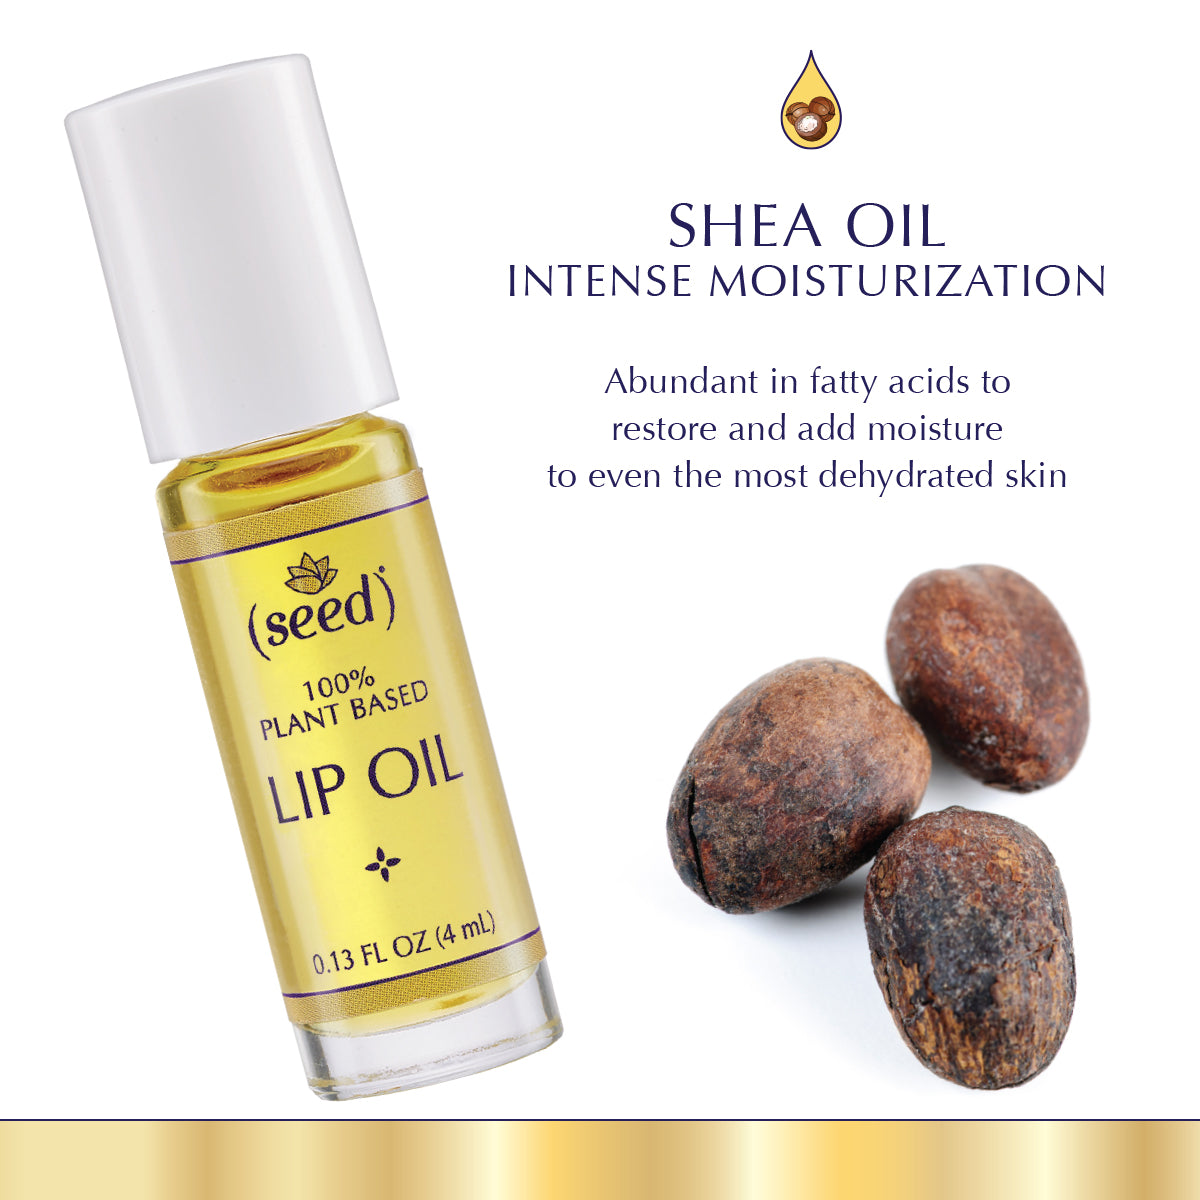 Seed Lip Oil is enriched with Shea Oil